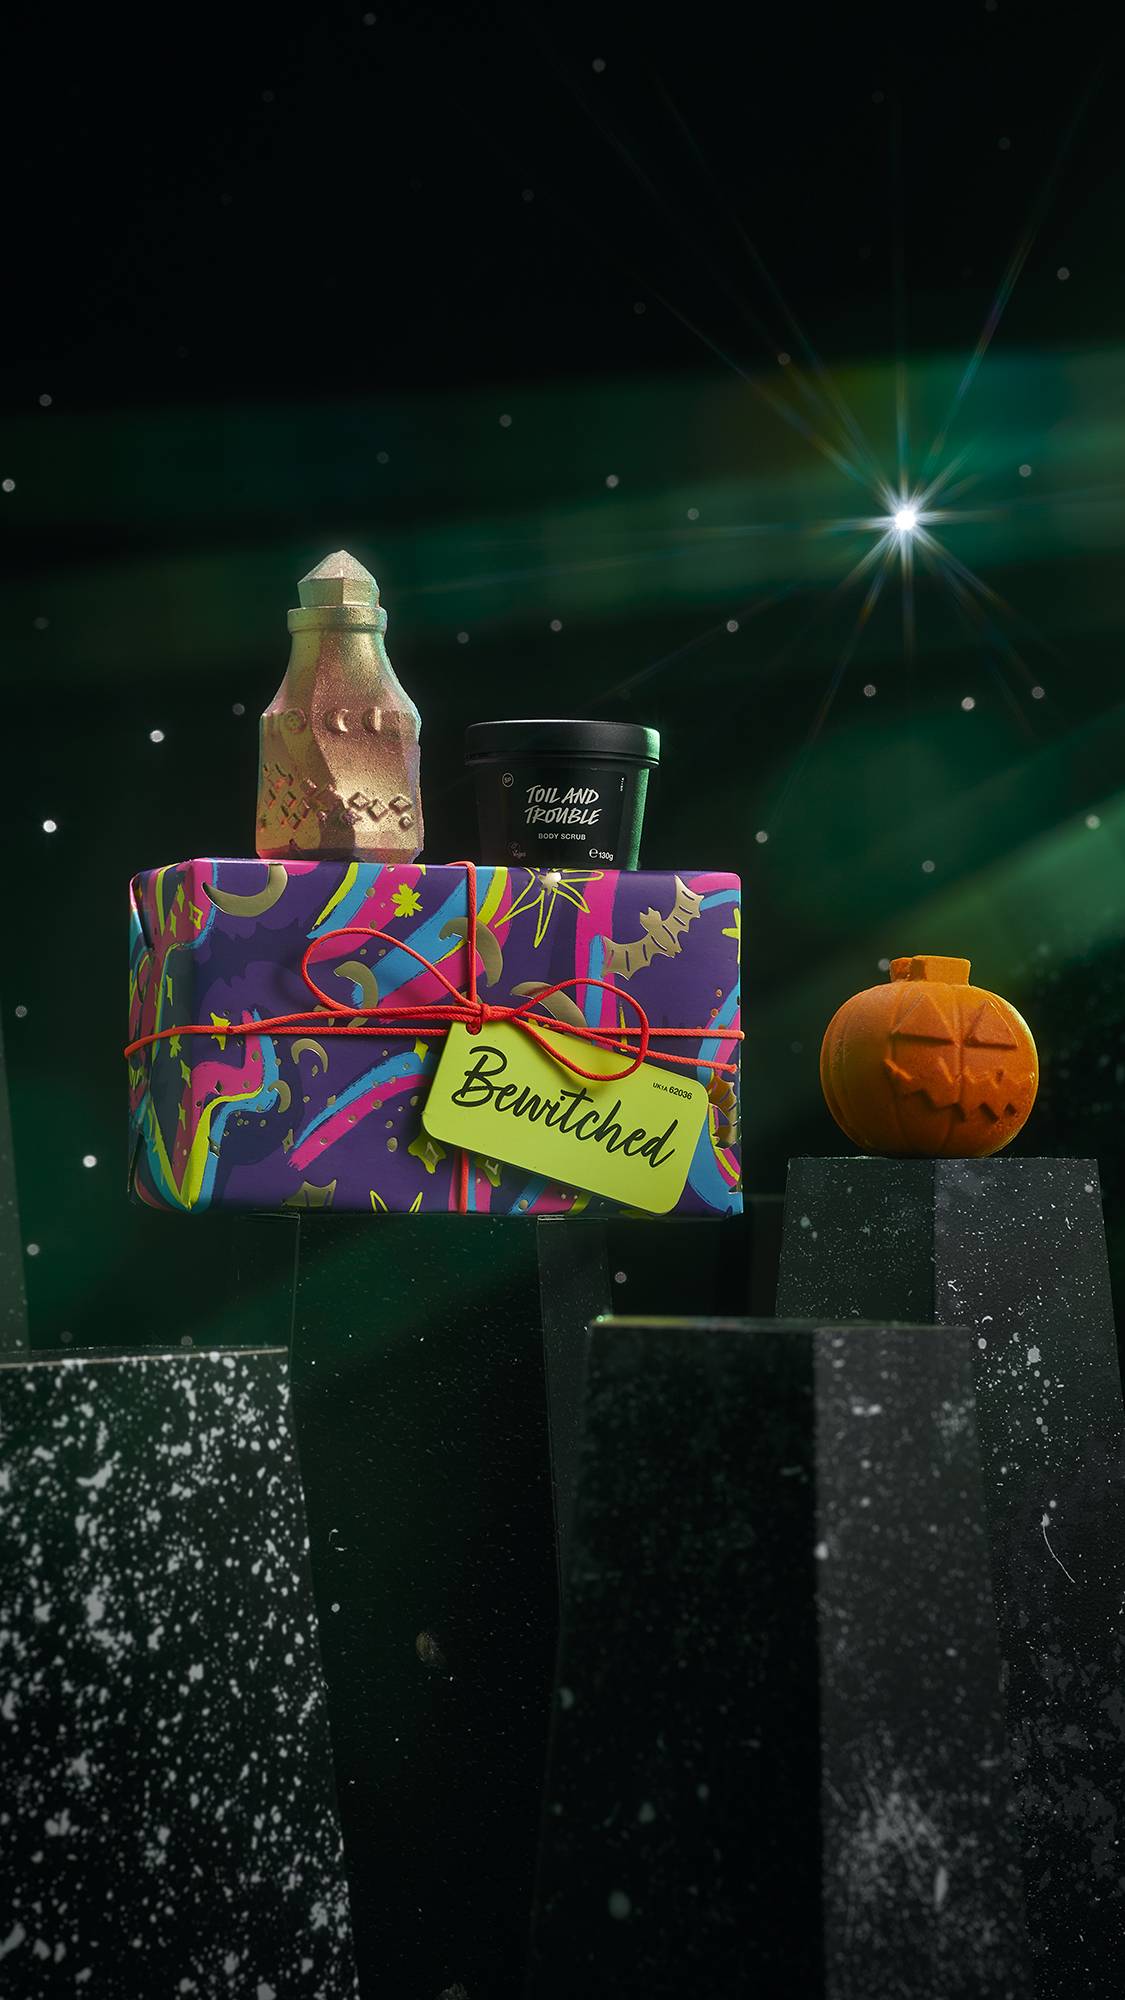 Bewitched gift. Toil and Trouble body scrub, Pumpkin Crumble bubble bar and Magic Potion bath bomb sit atop a colourful box.